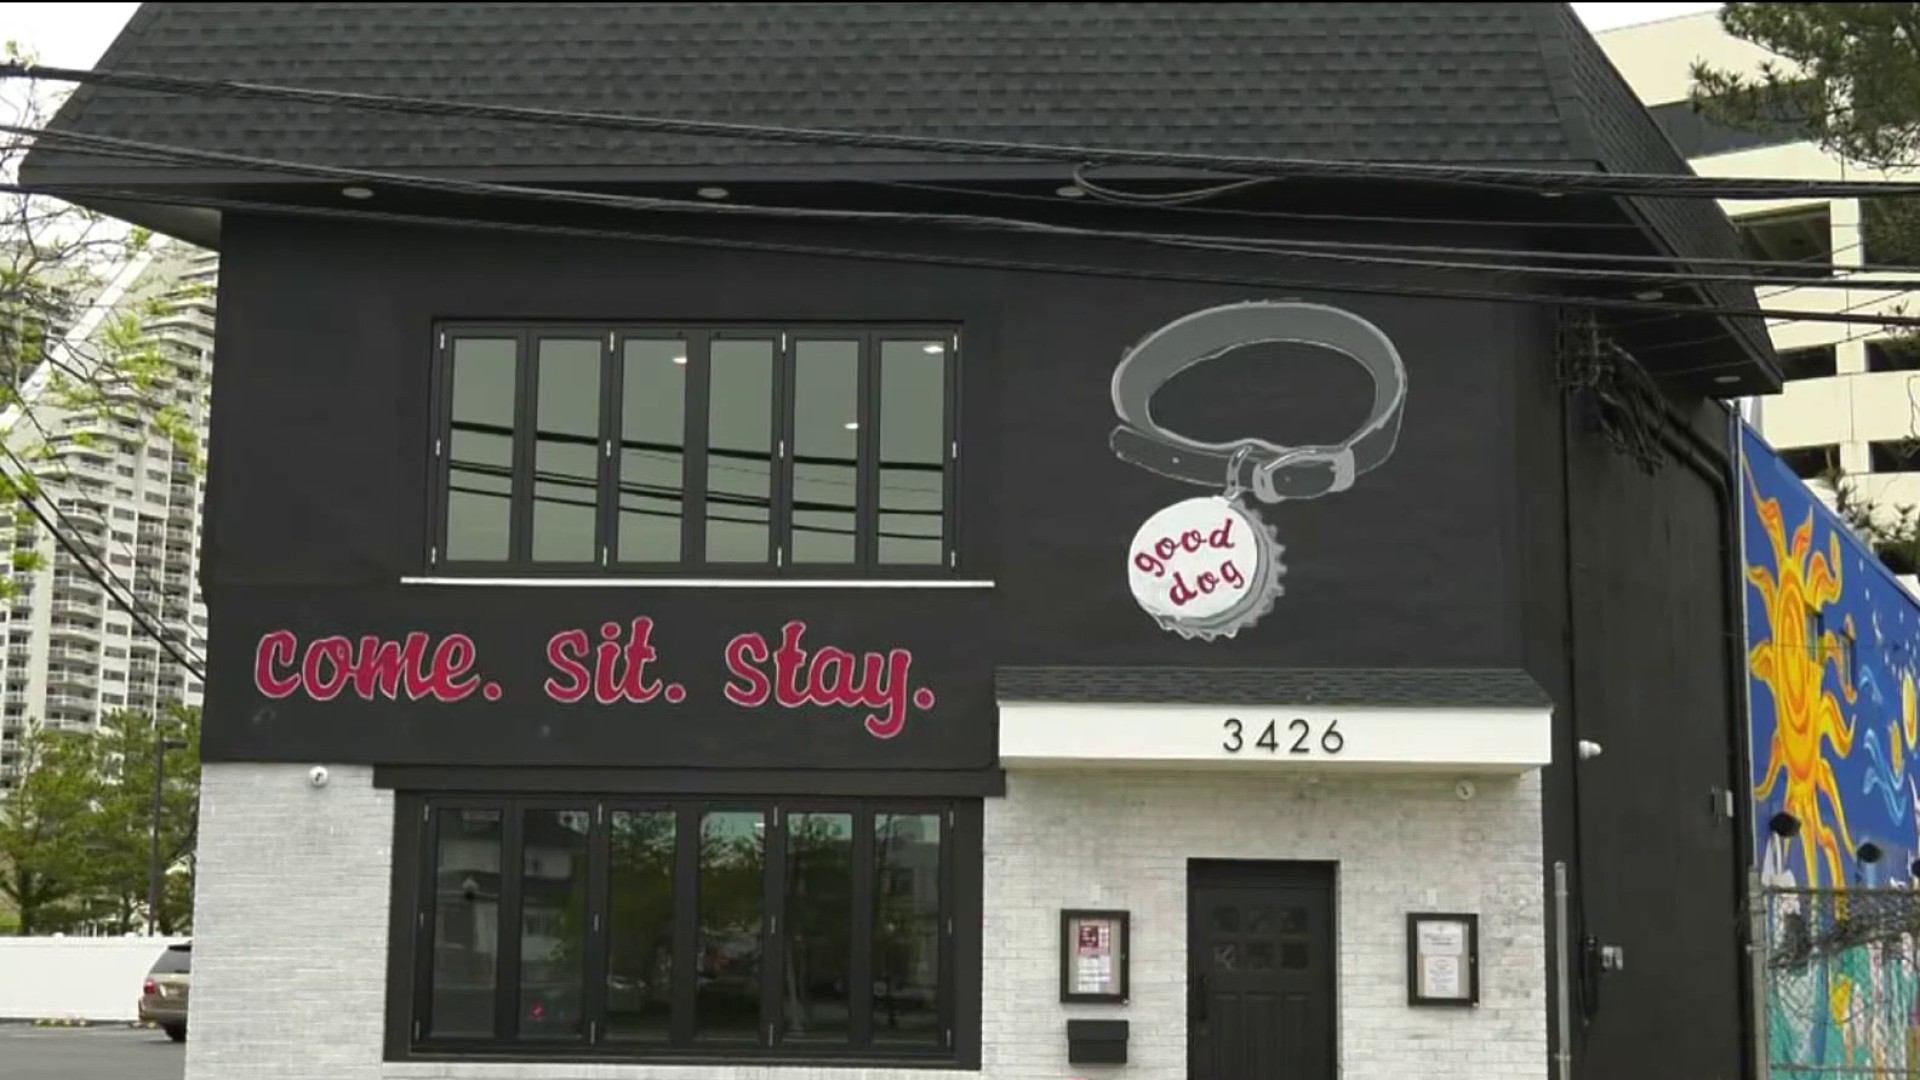 An Old Jersey Shore Swingers Sex Club Is Being Repurposed Into a New